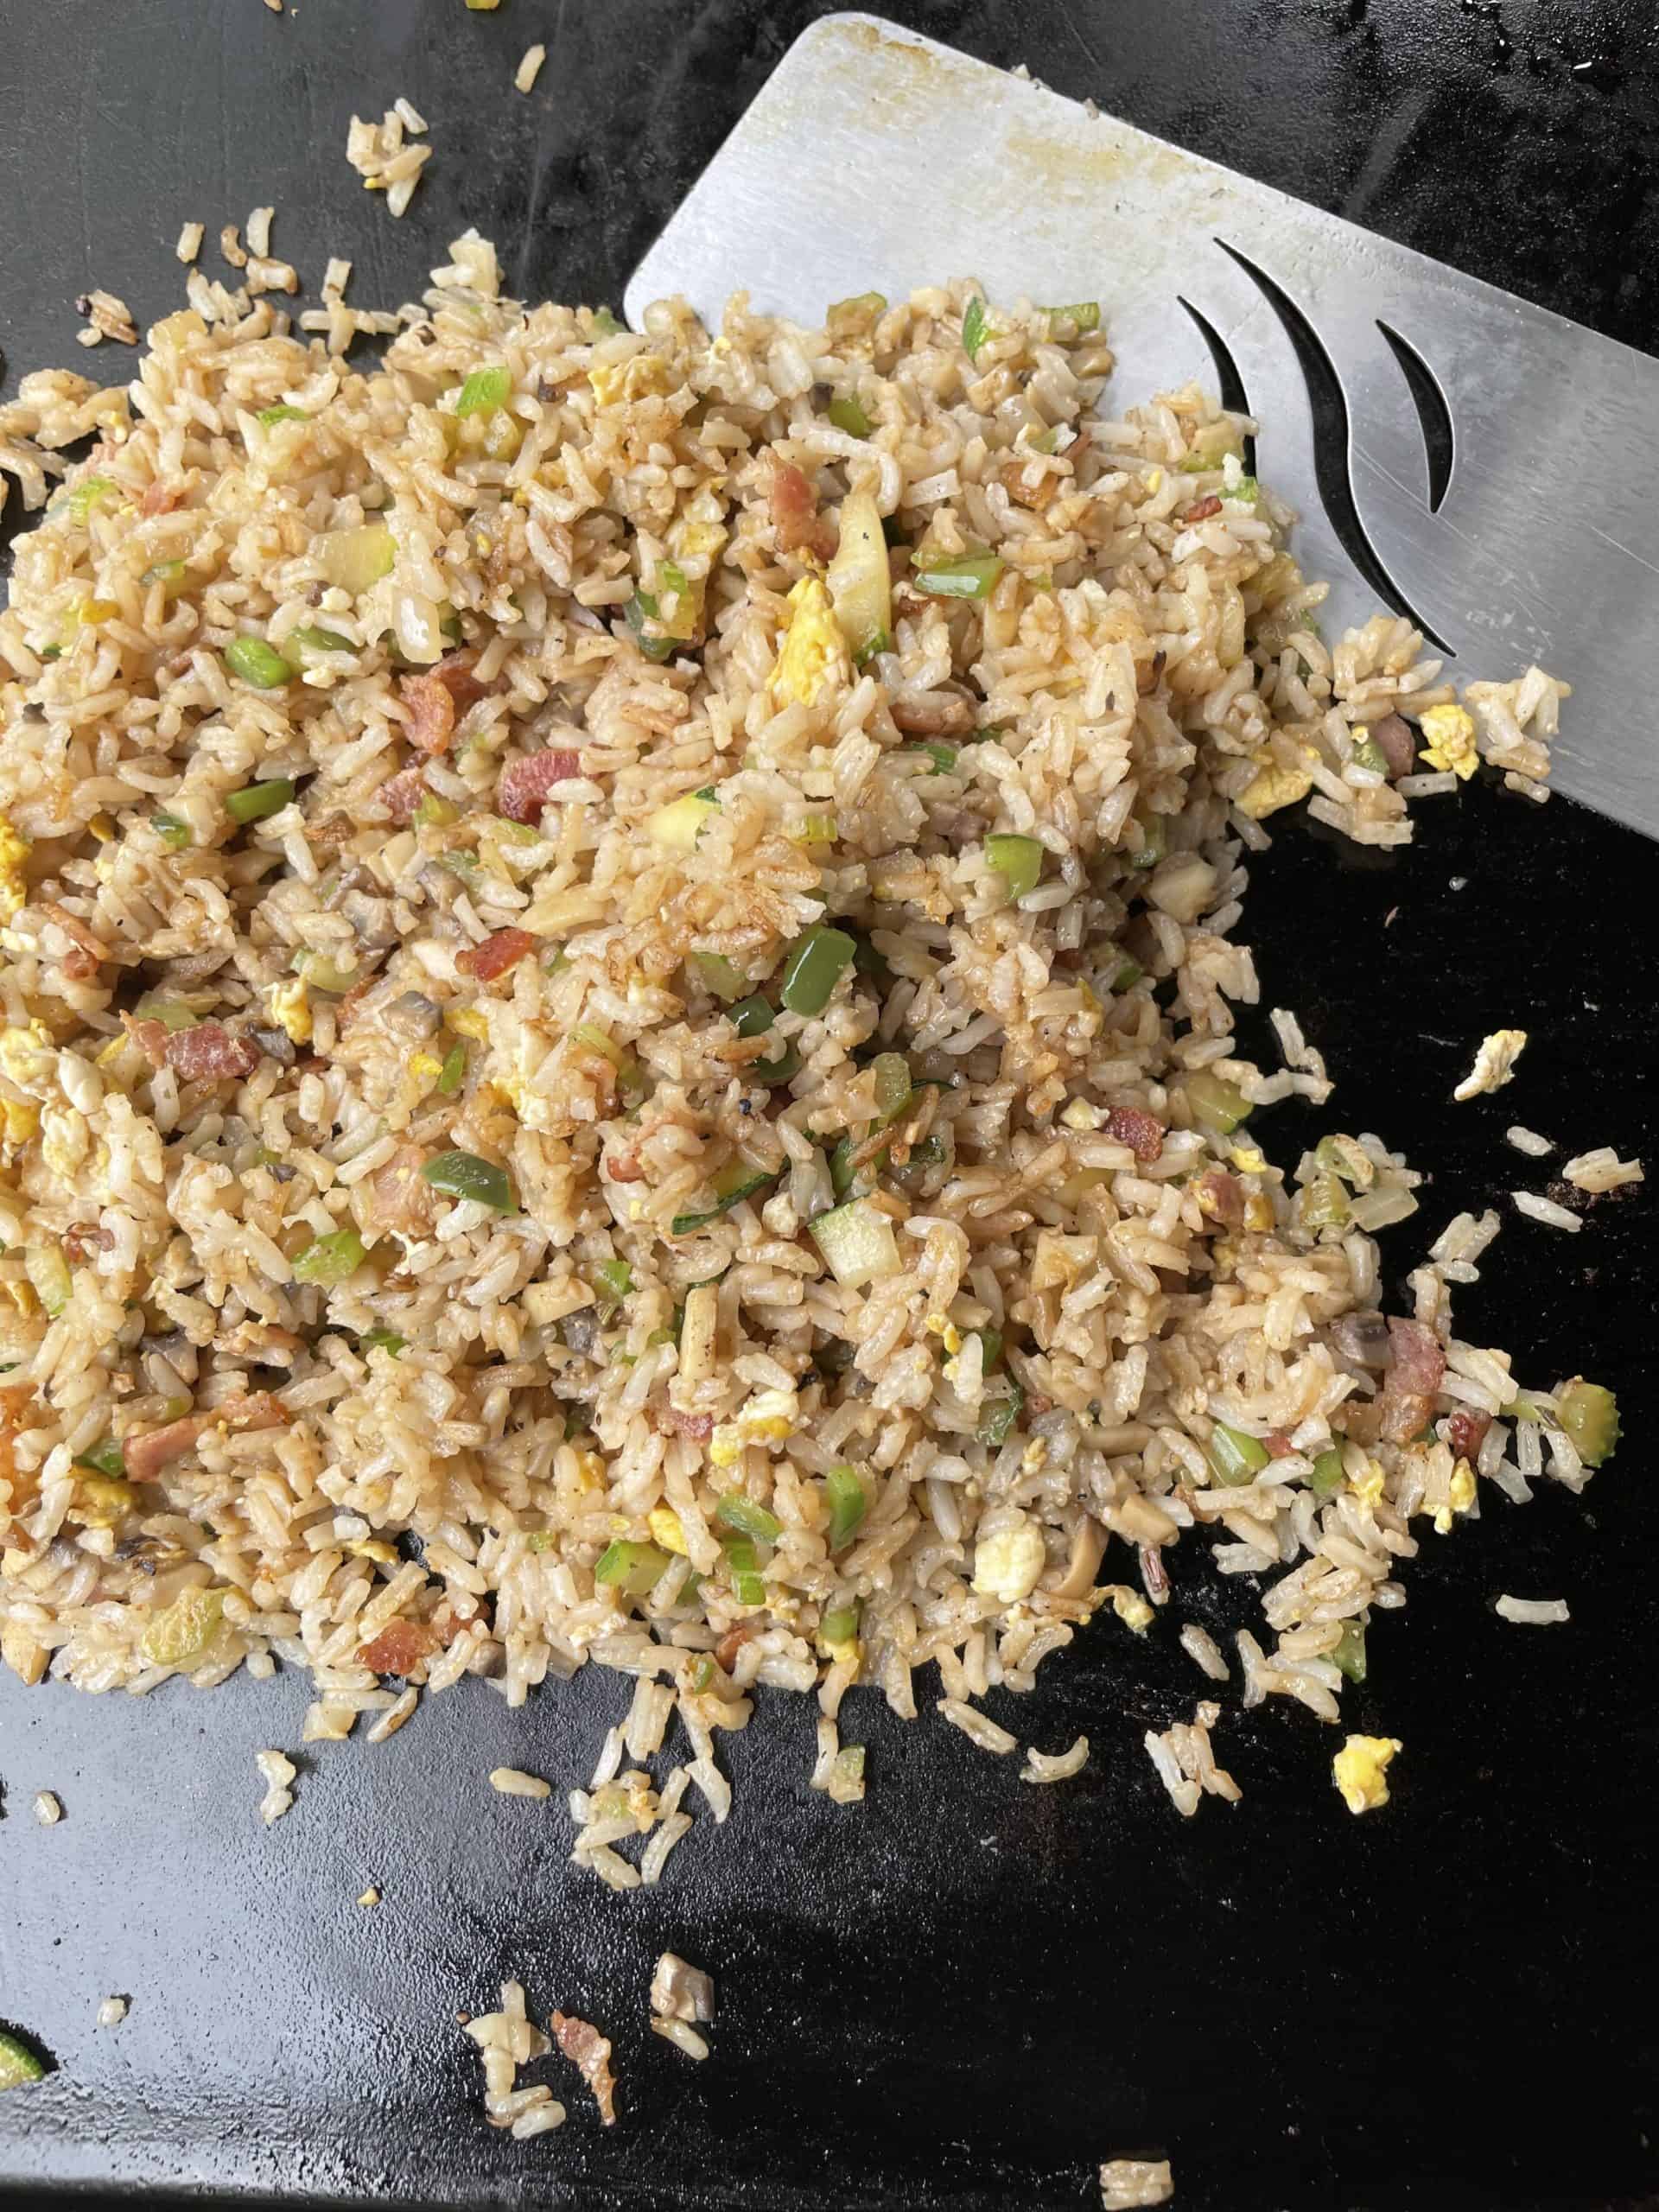 Fully cooked griddle fried rice with a griddle spatula.